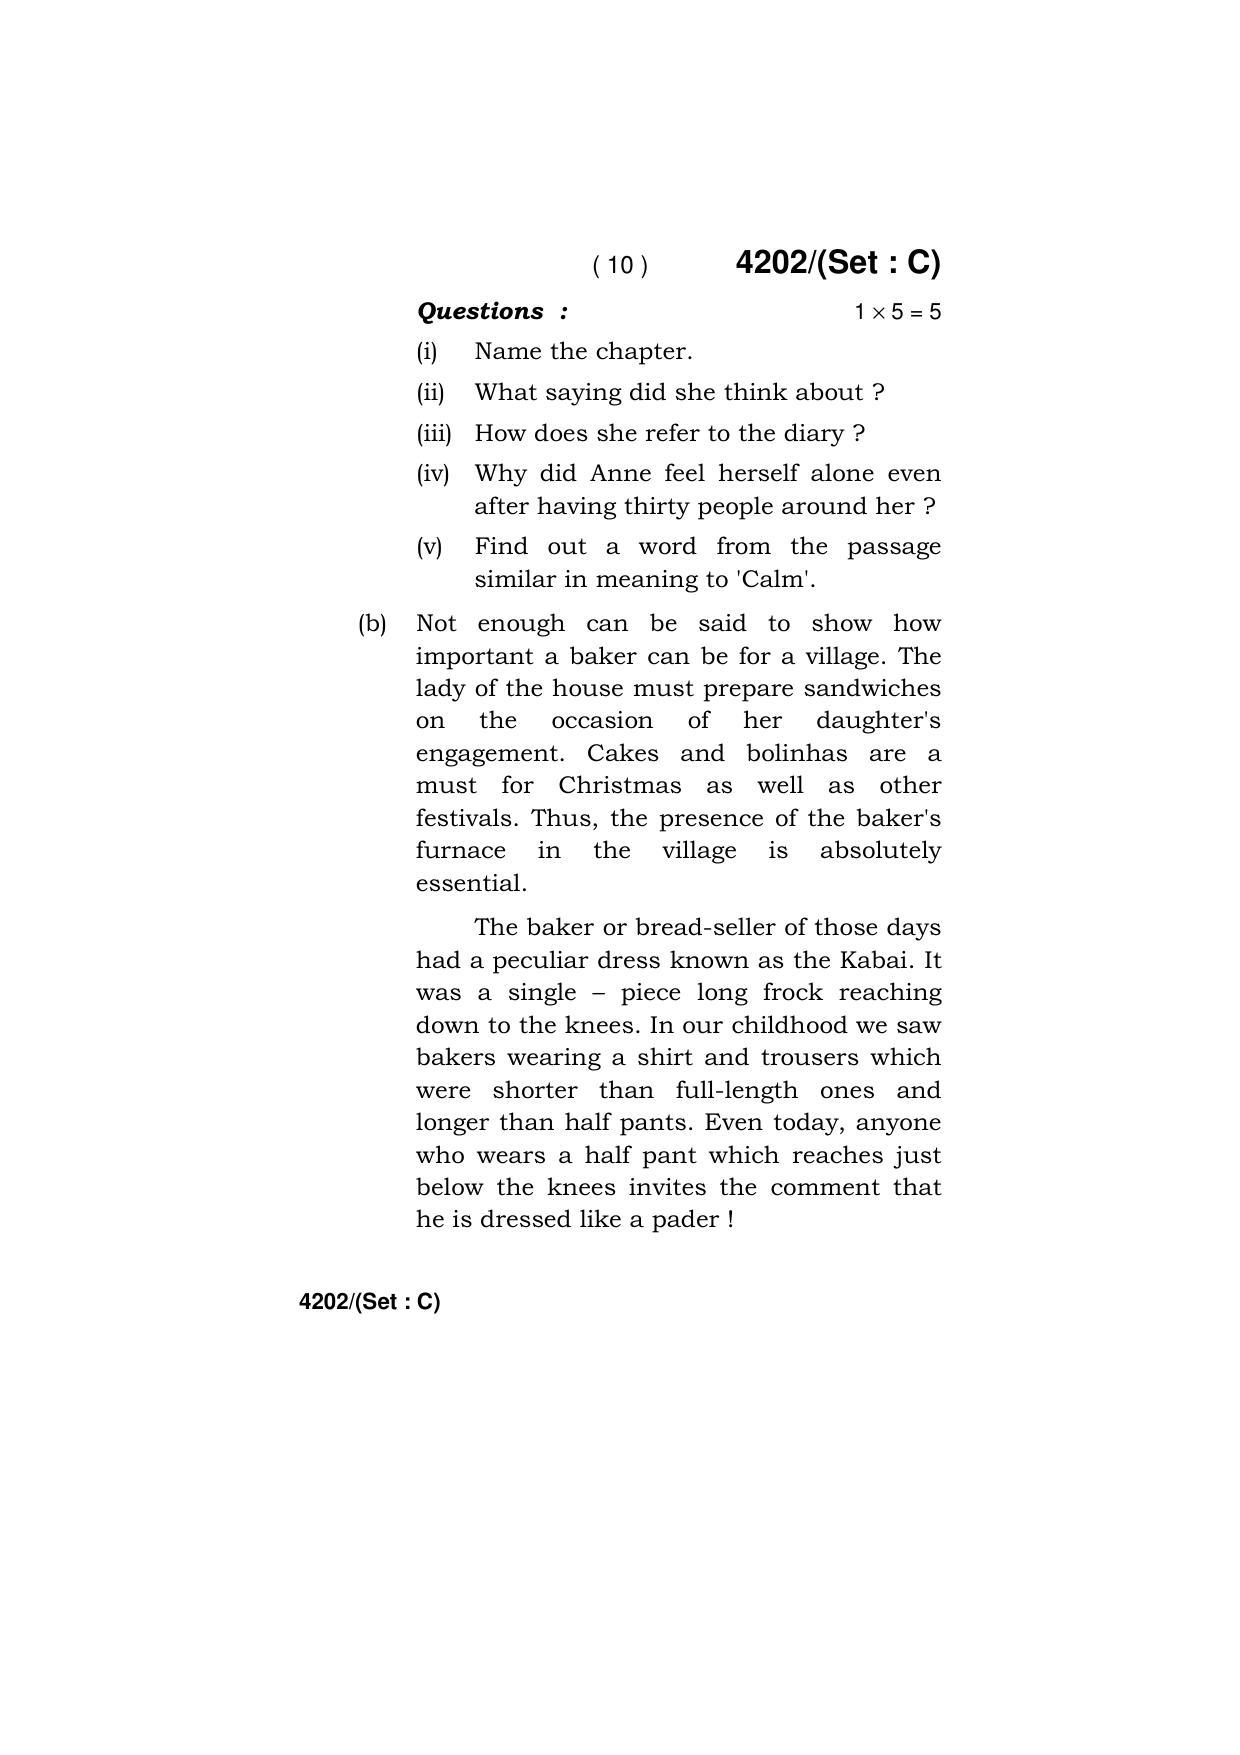 Haryana Board HBSE Class 10 English (All Set) 2019 Question Paper - Page 42